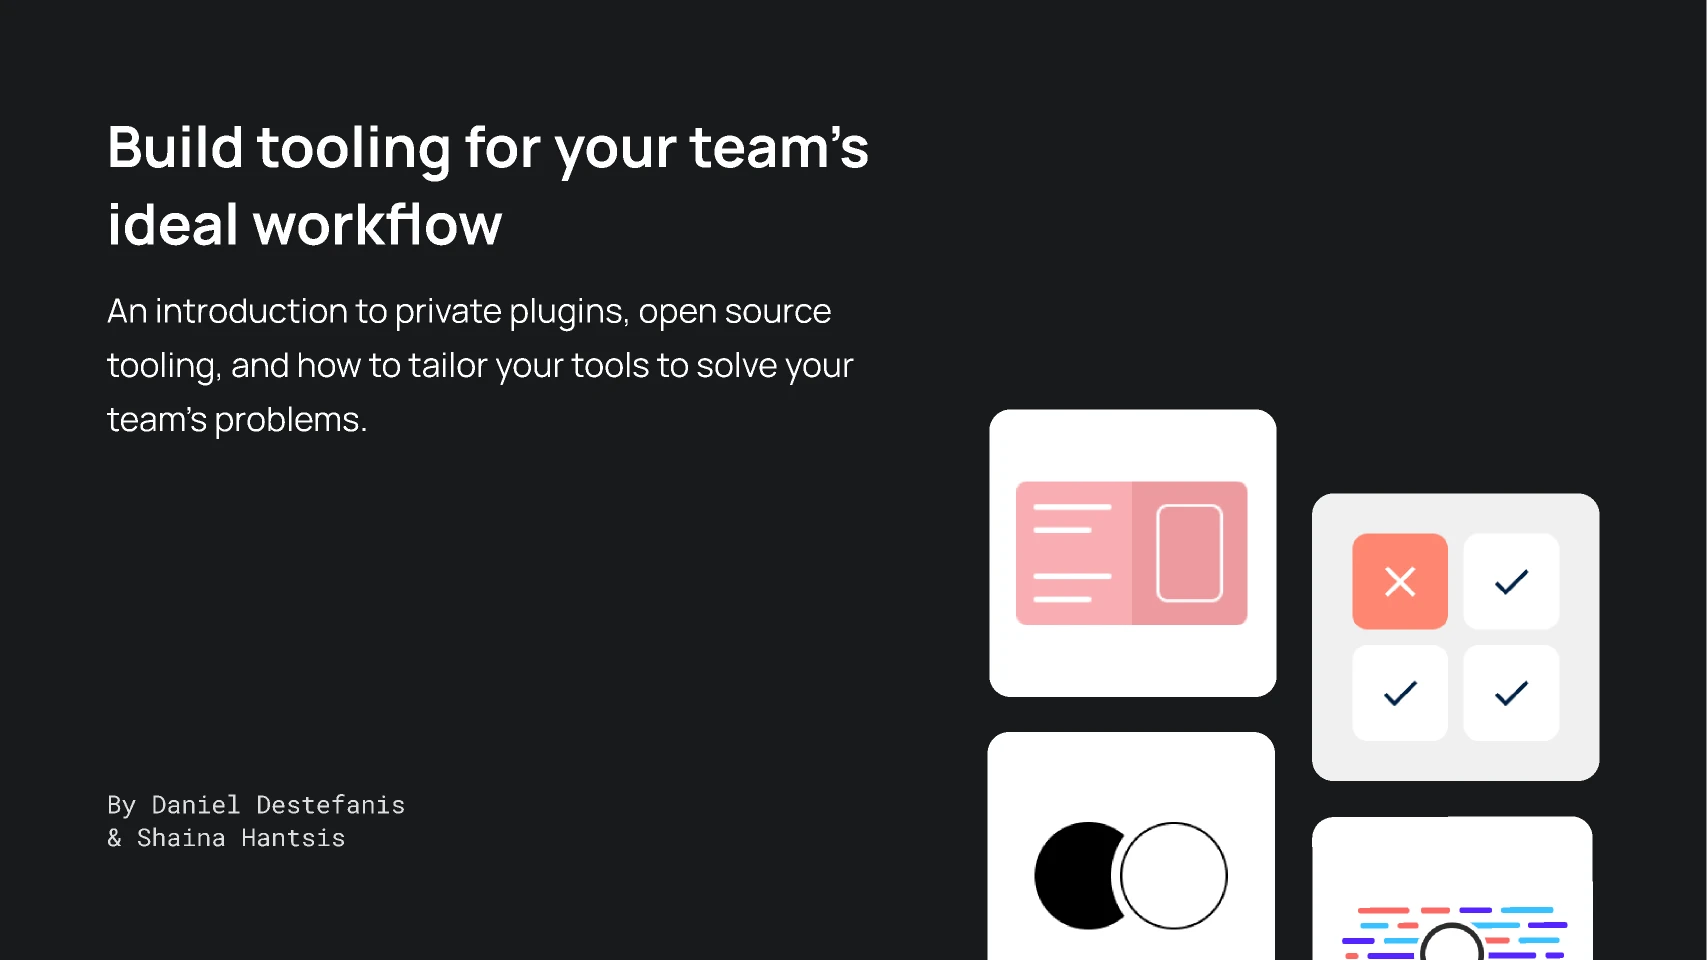 Build tooling for your team's ideal workflow slides for Figma and Adobe XD